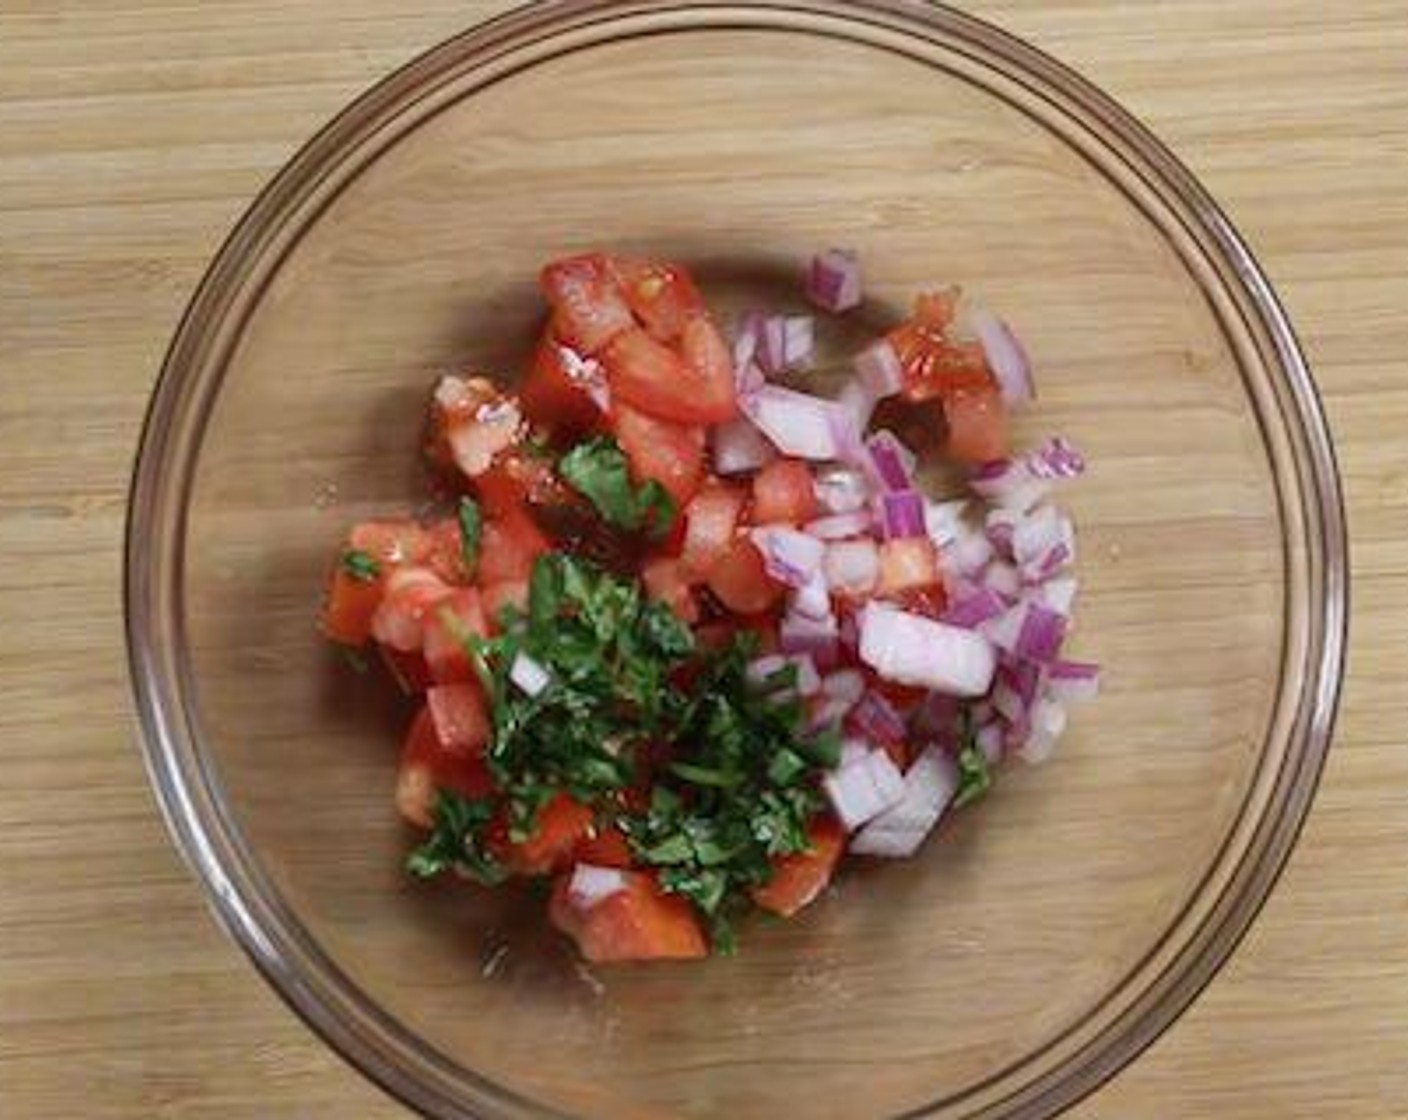 step 2 For the salsa, into a bowl add Tomato (1/4 cup), Red Onion (1 Tbsp), Fresh Parsley (1 tsp), and Lime (1/2).